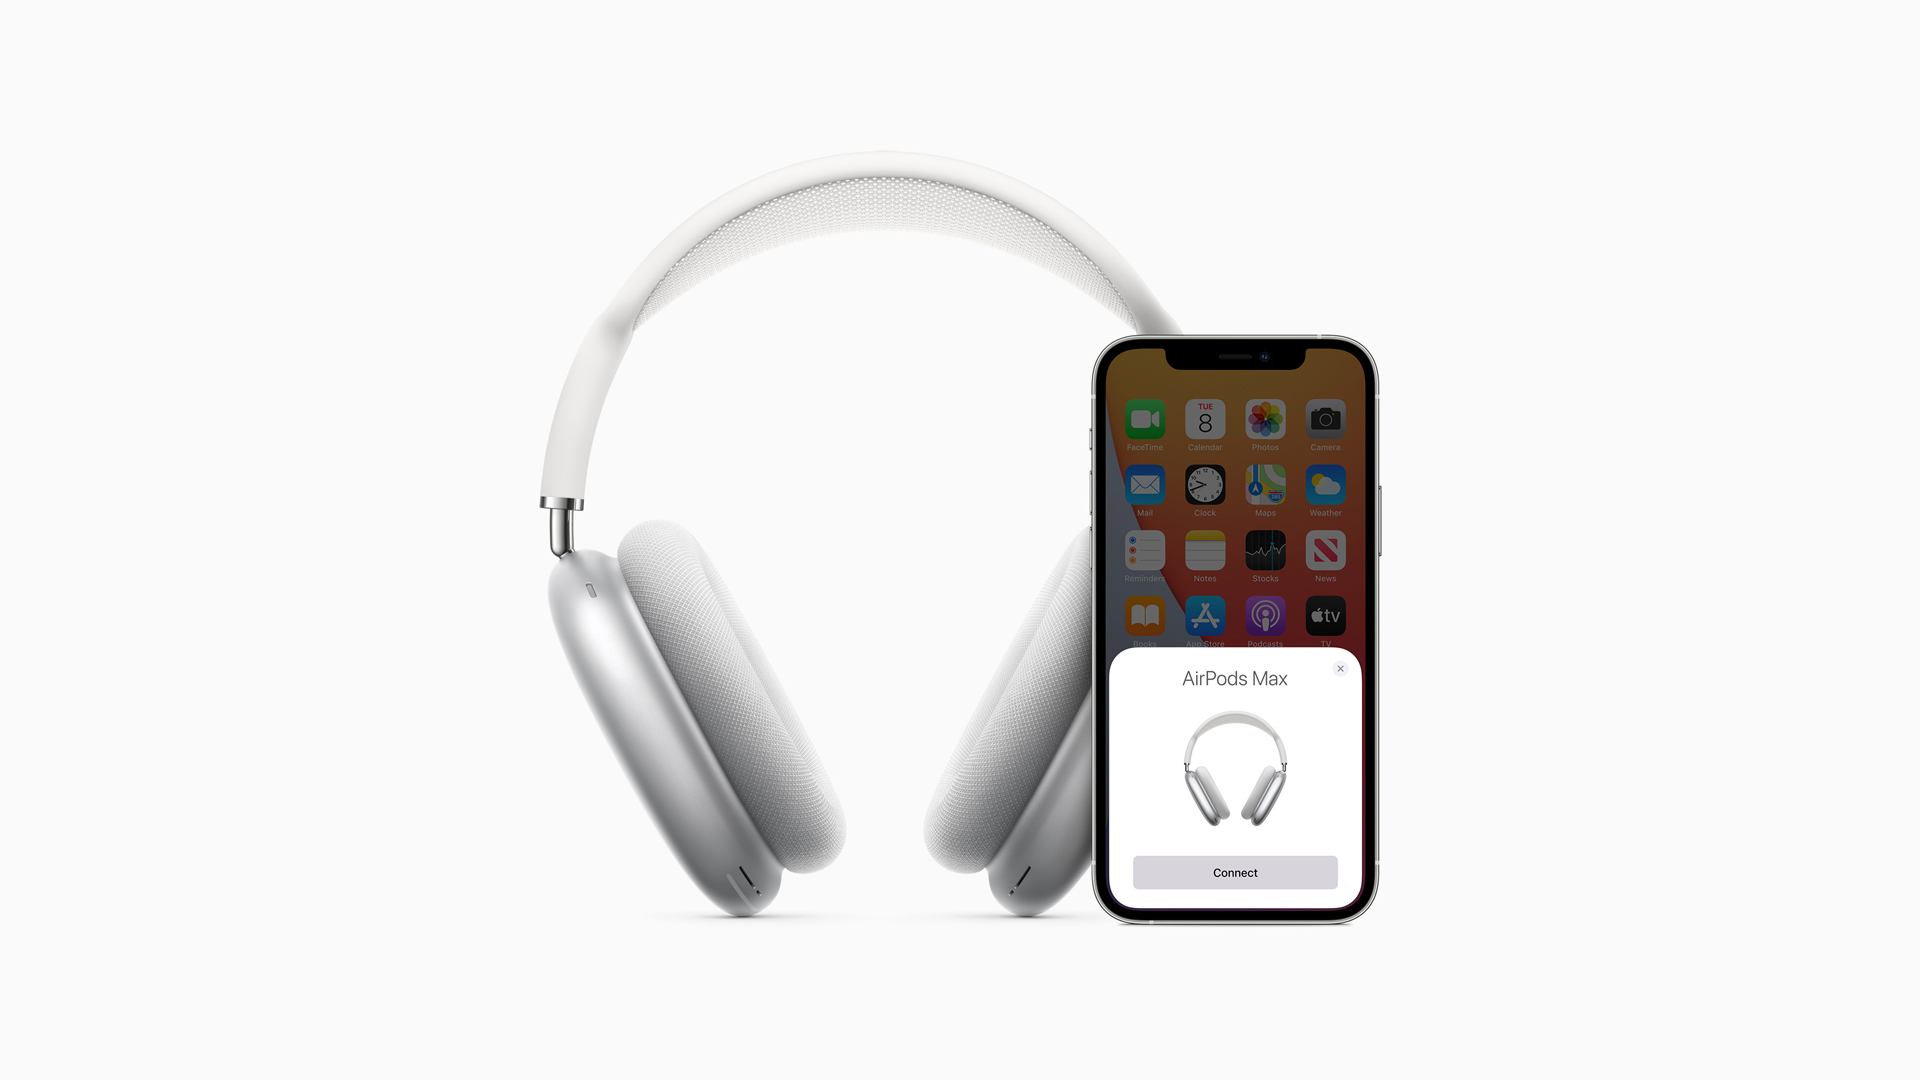 AirPods Max is paired with an iOS phone on a white background.